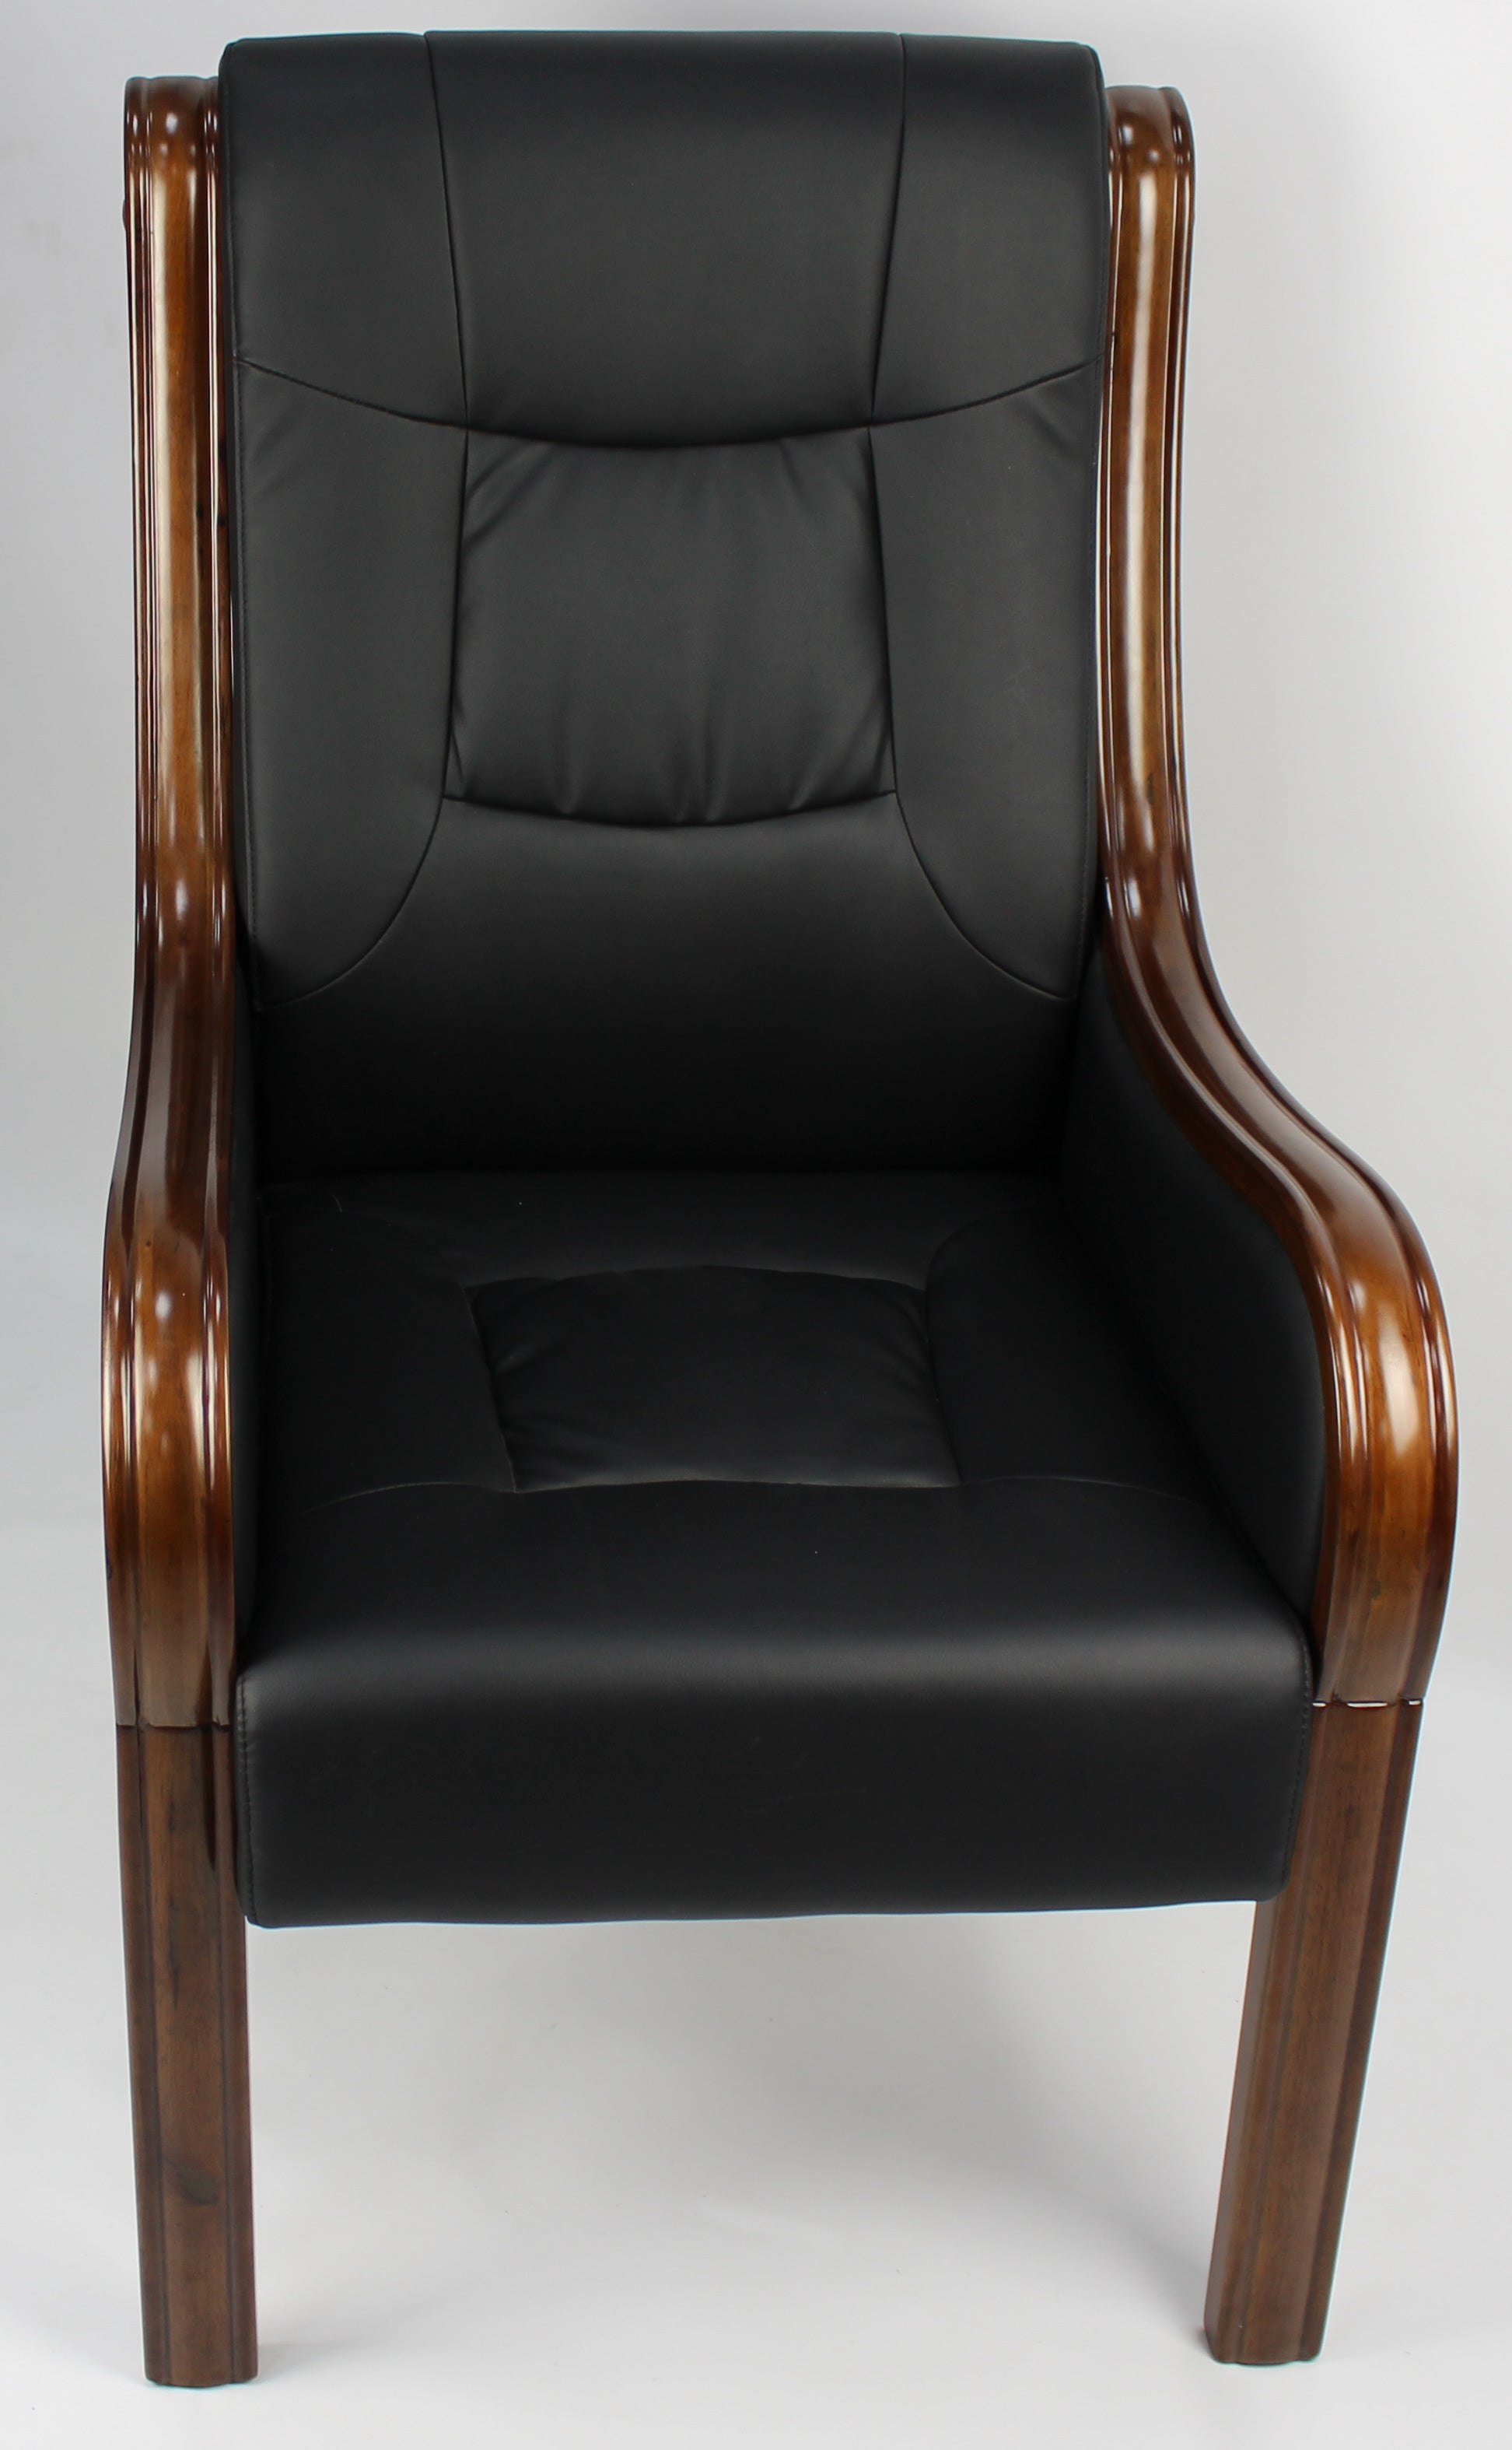 Black Leather Executive Visitors Chair with Wooden Frame - F53C